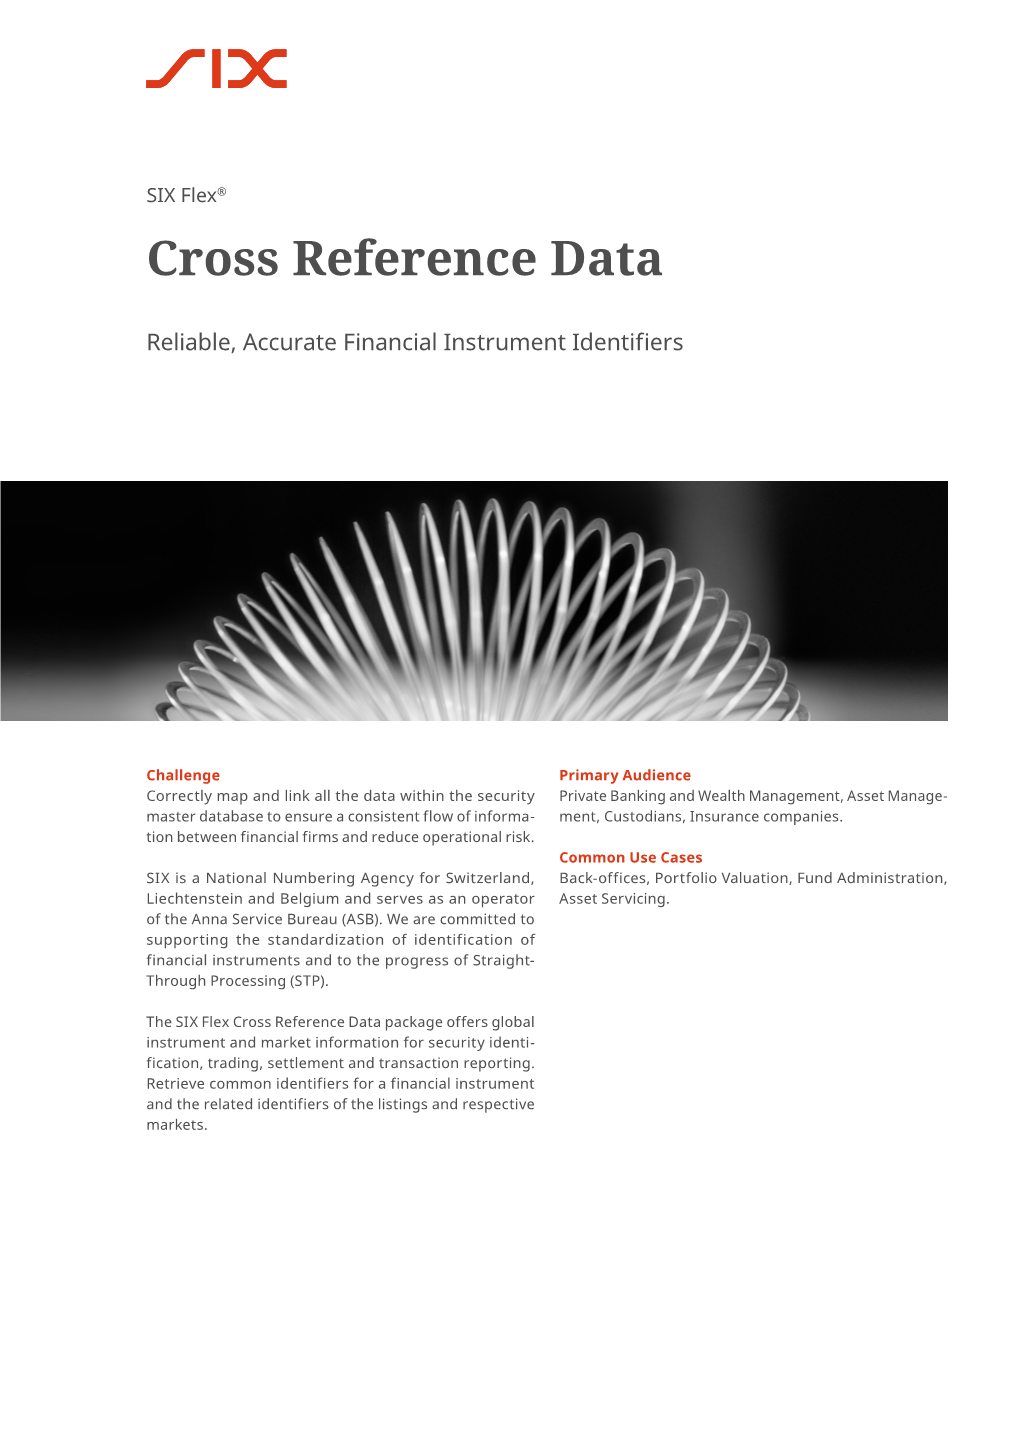 Cross Reference Data